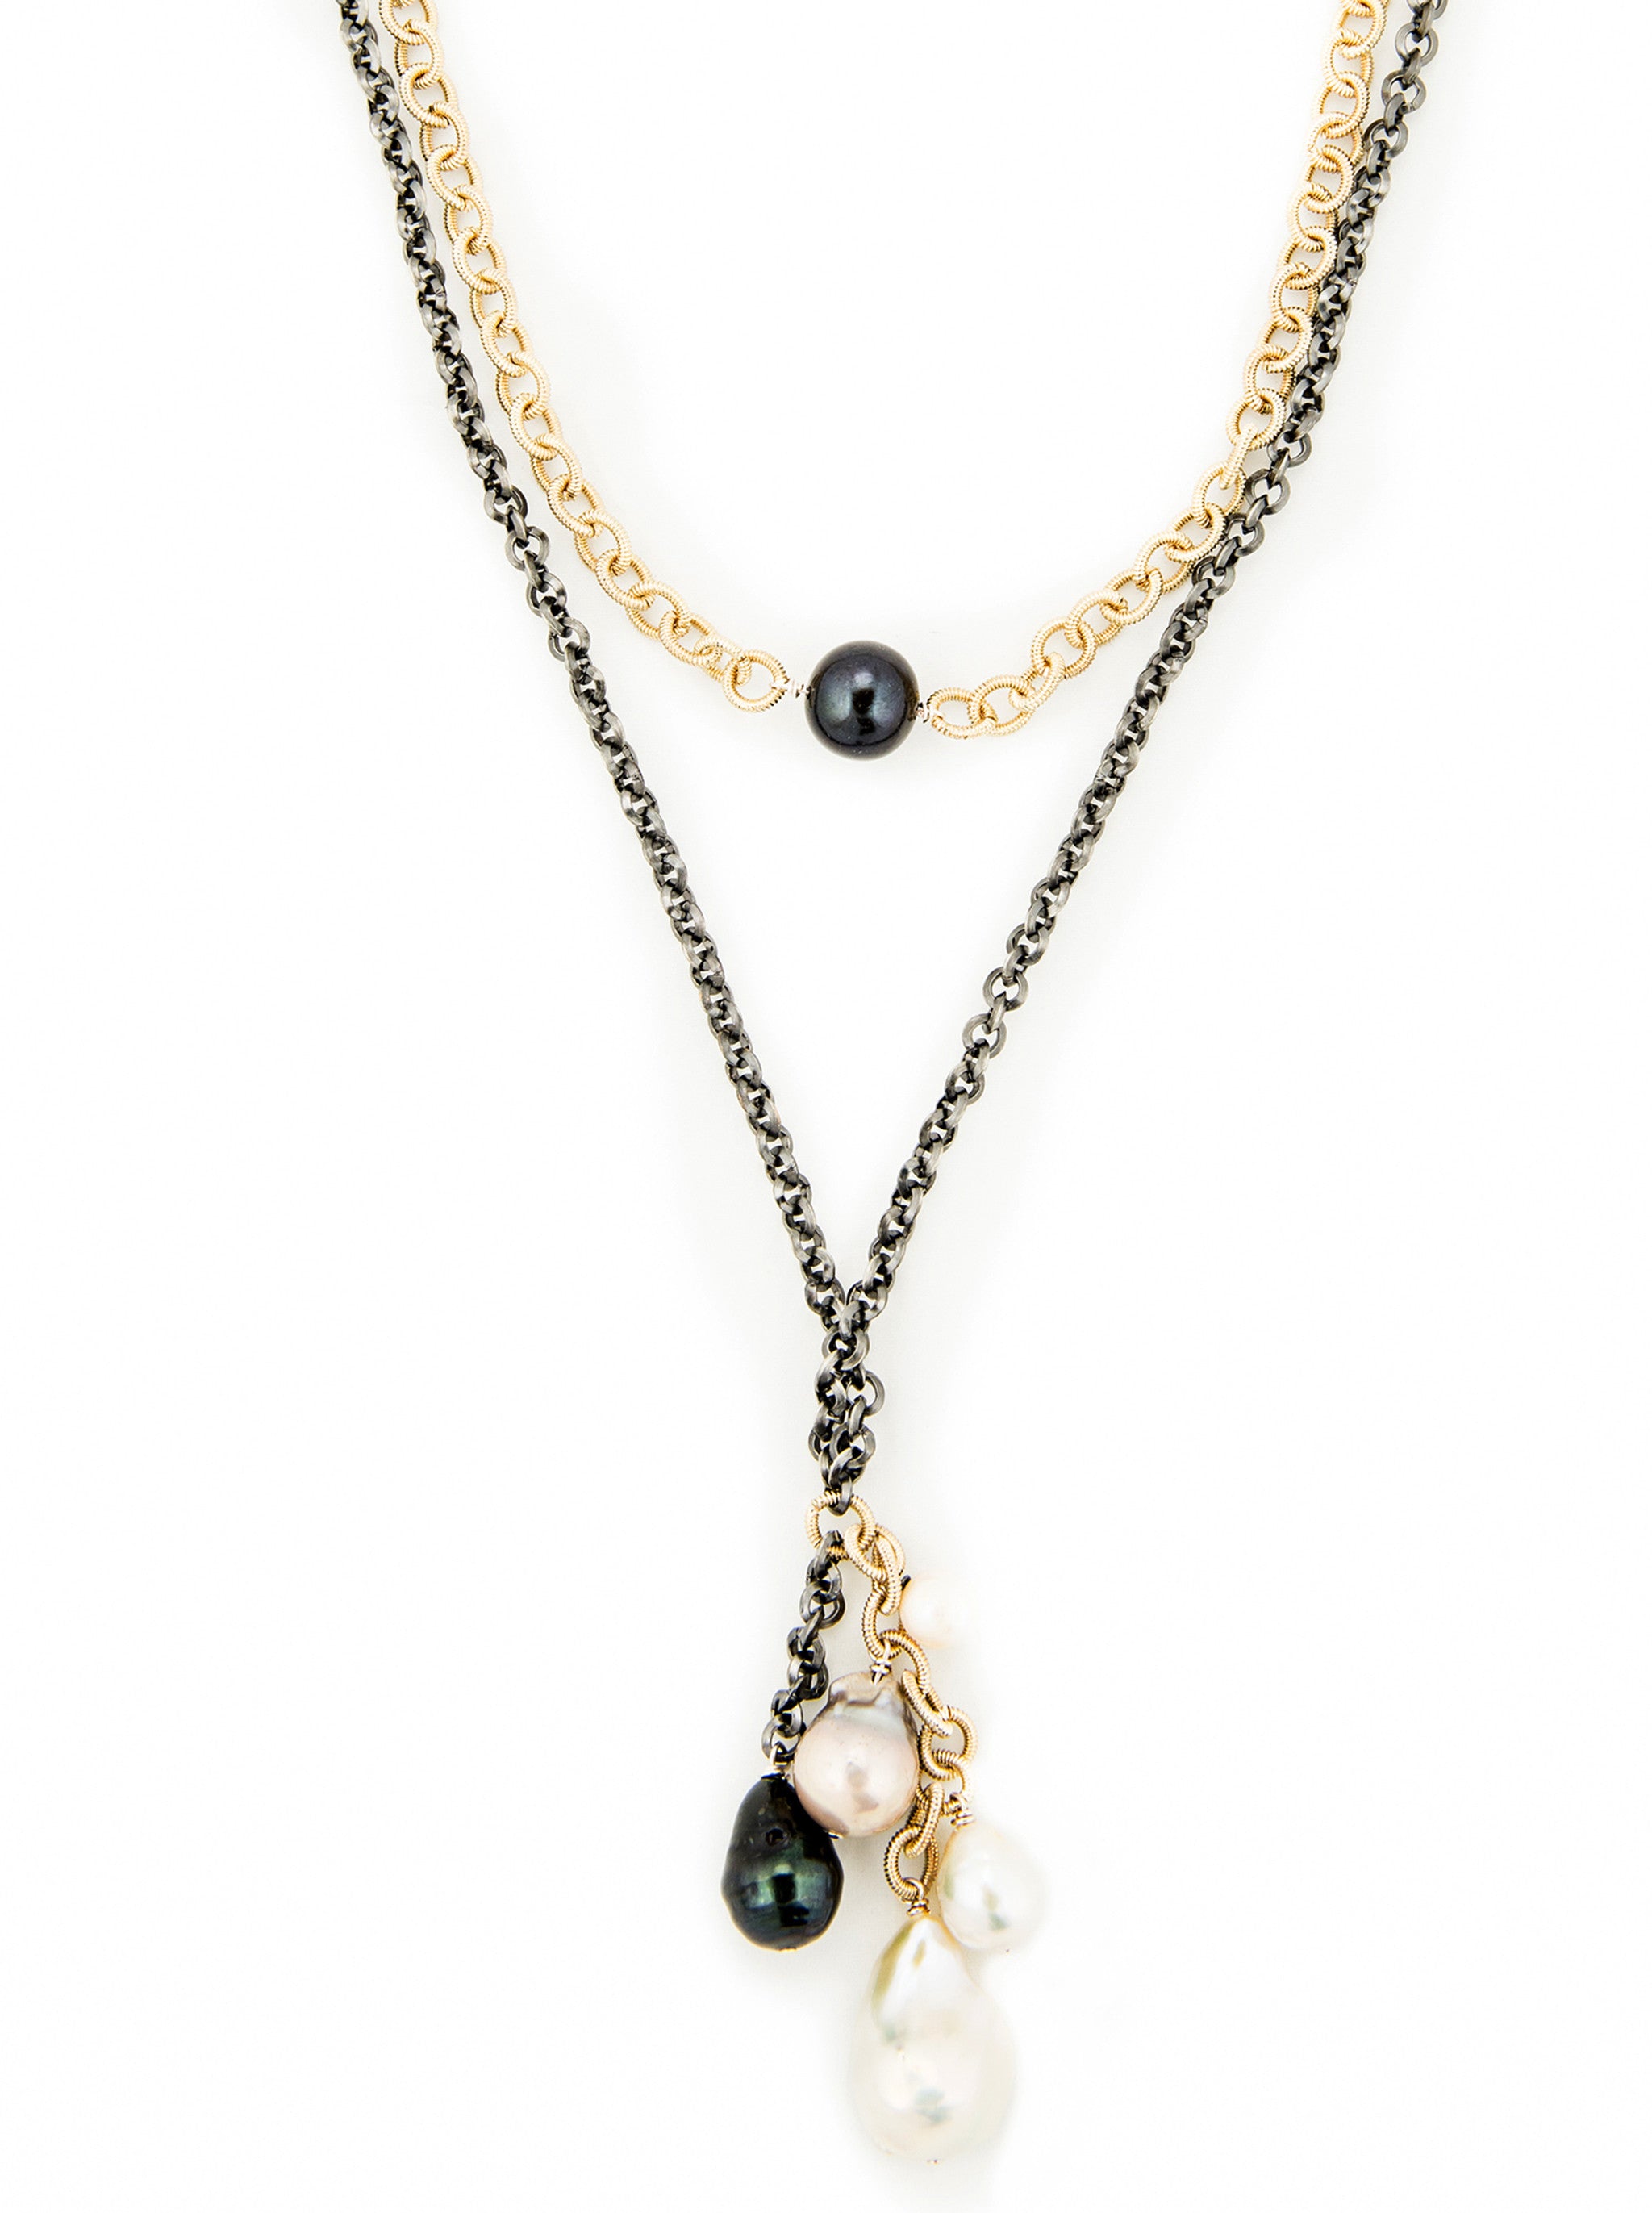 Mixed Metal with Black and White Fresh Water Pearls